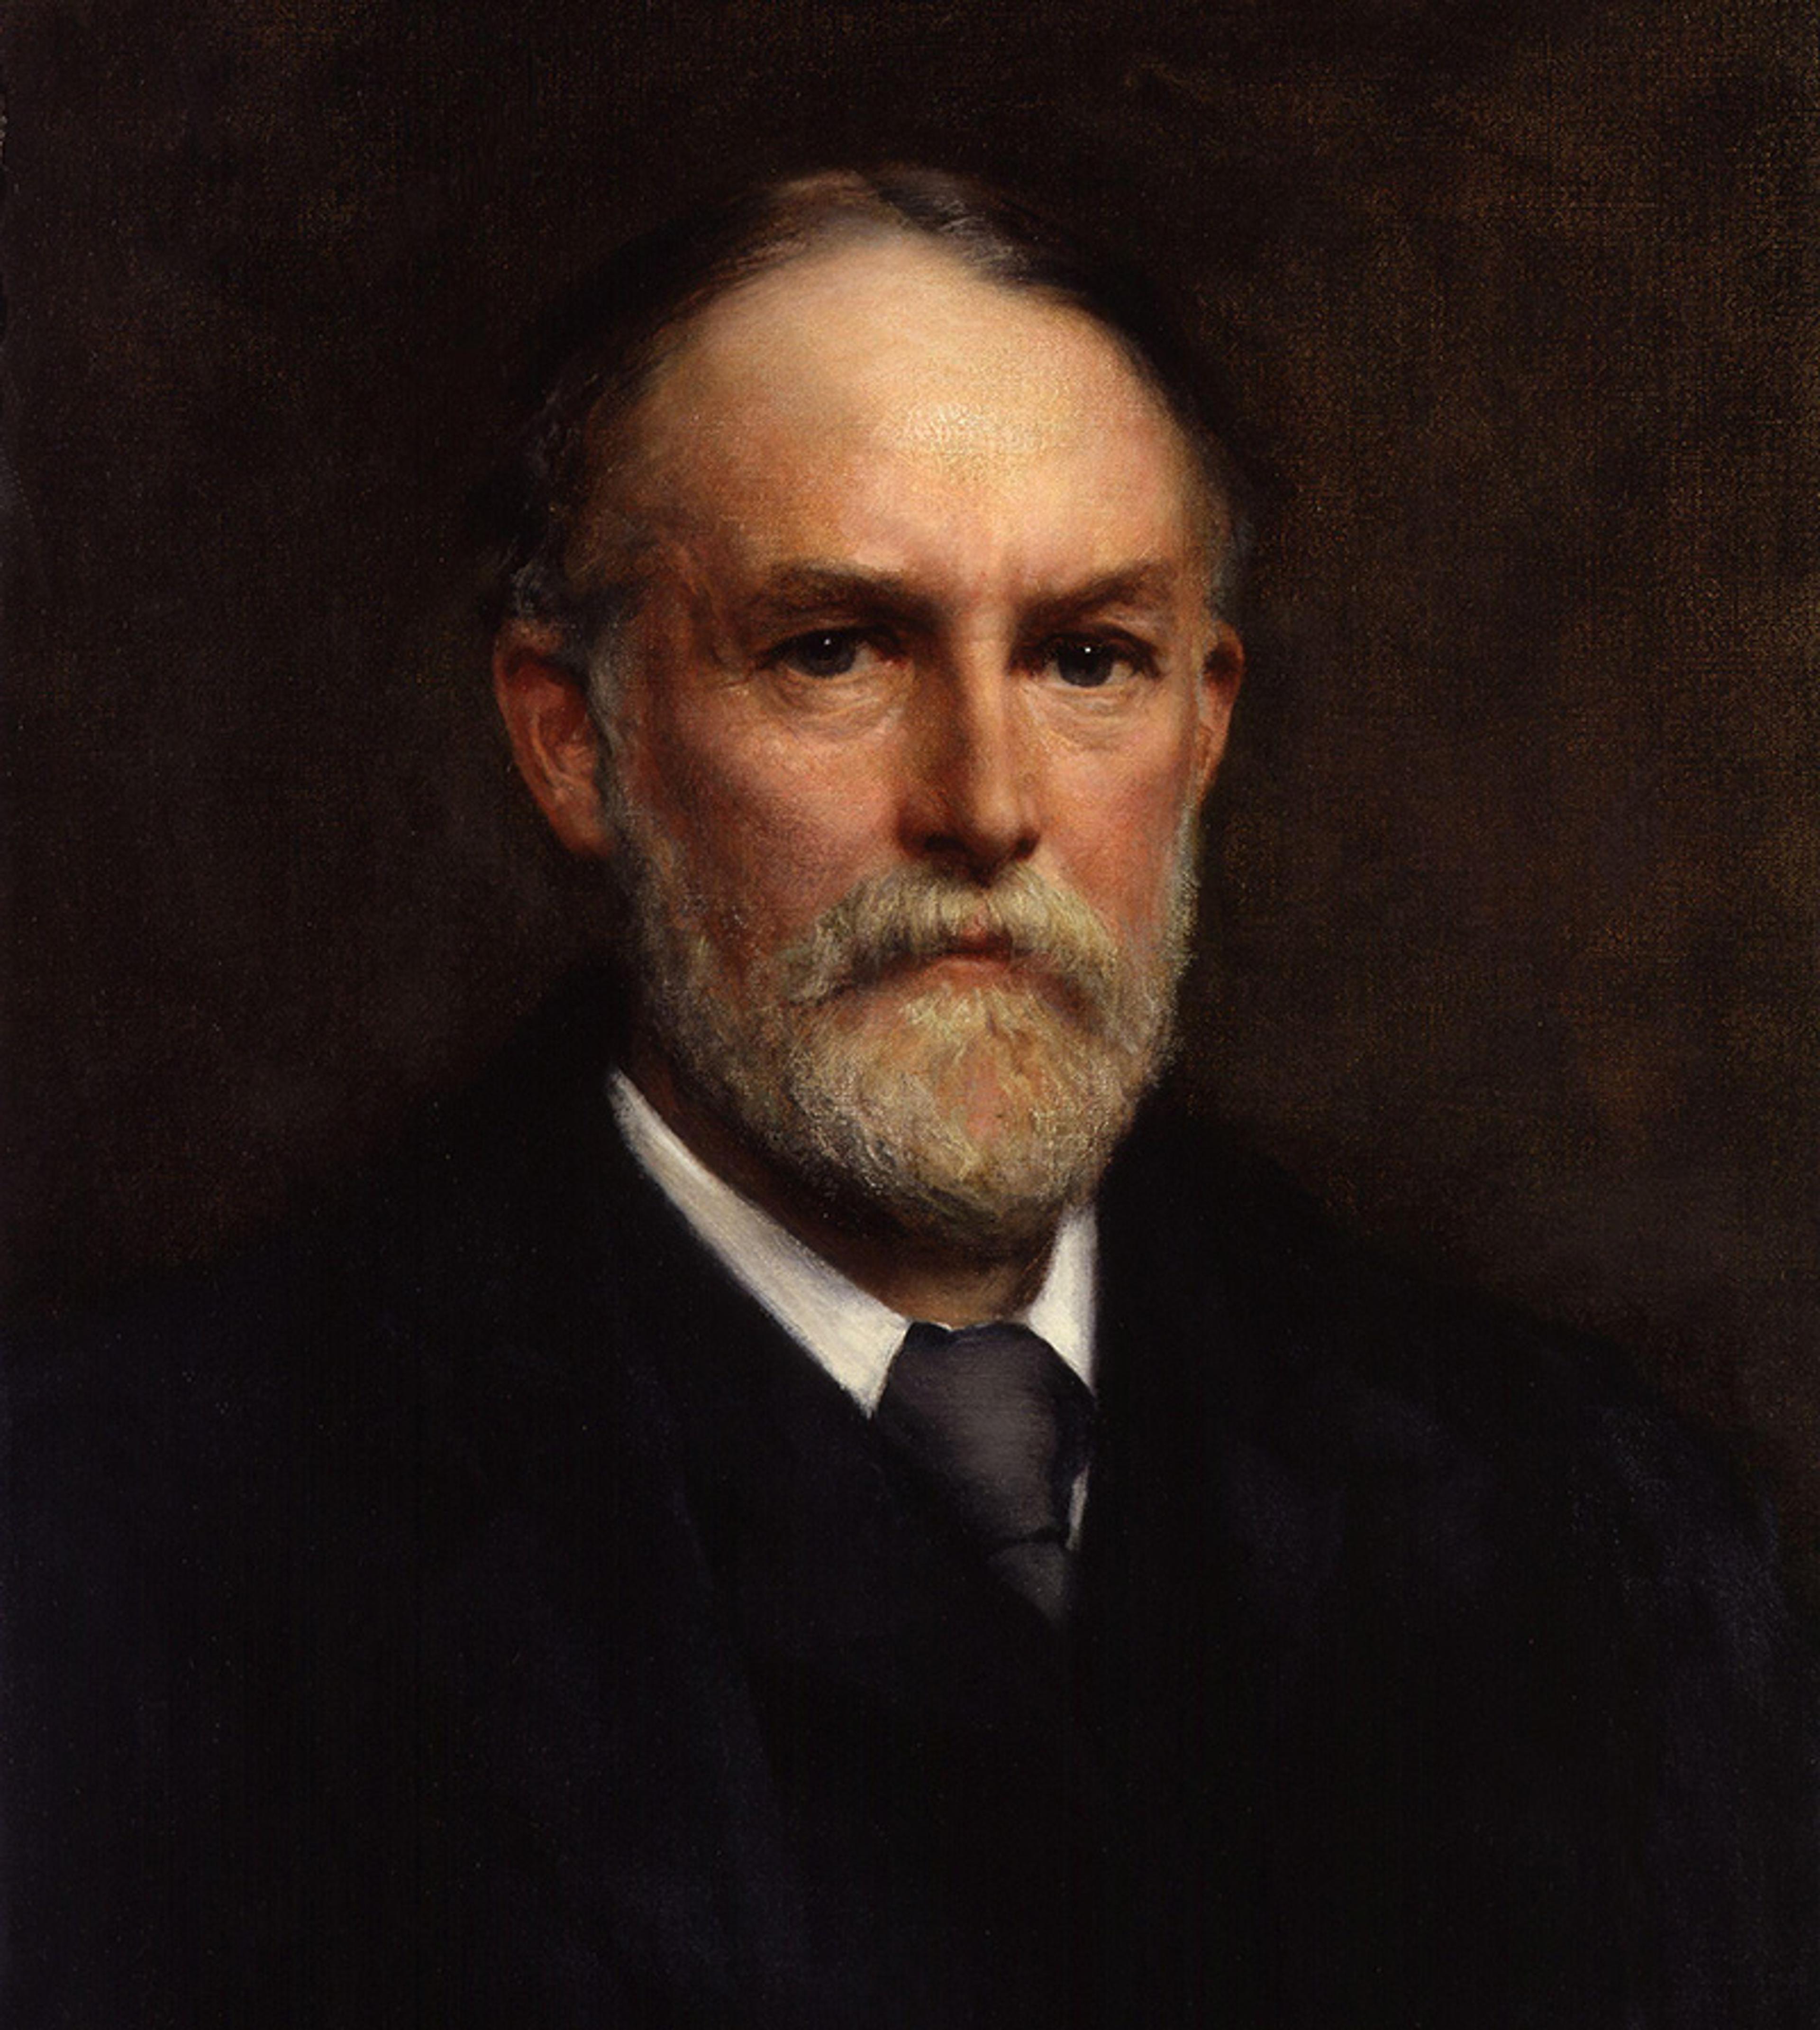 Portrait of an older man with a beard, wearing a dark suit and tie, against a dark background.